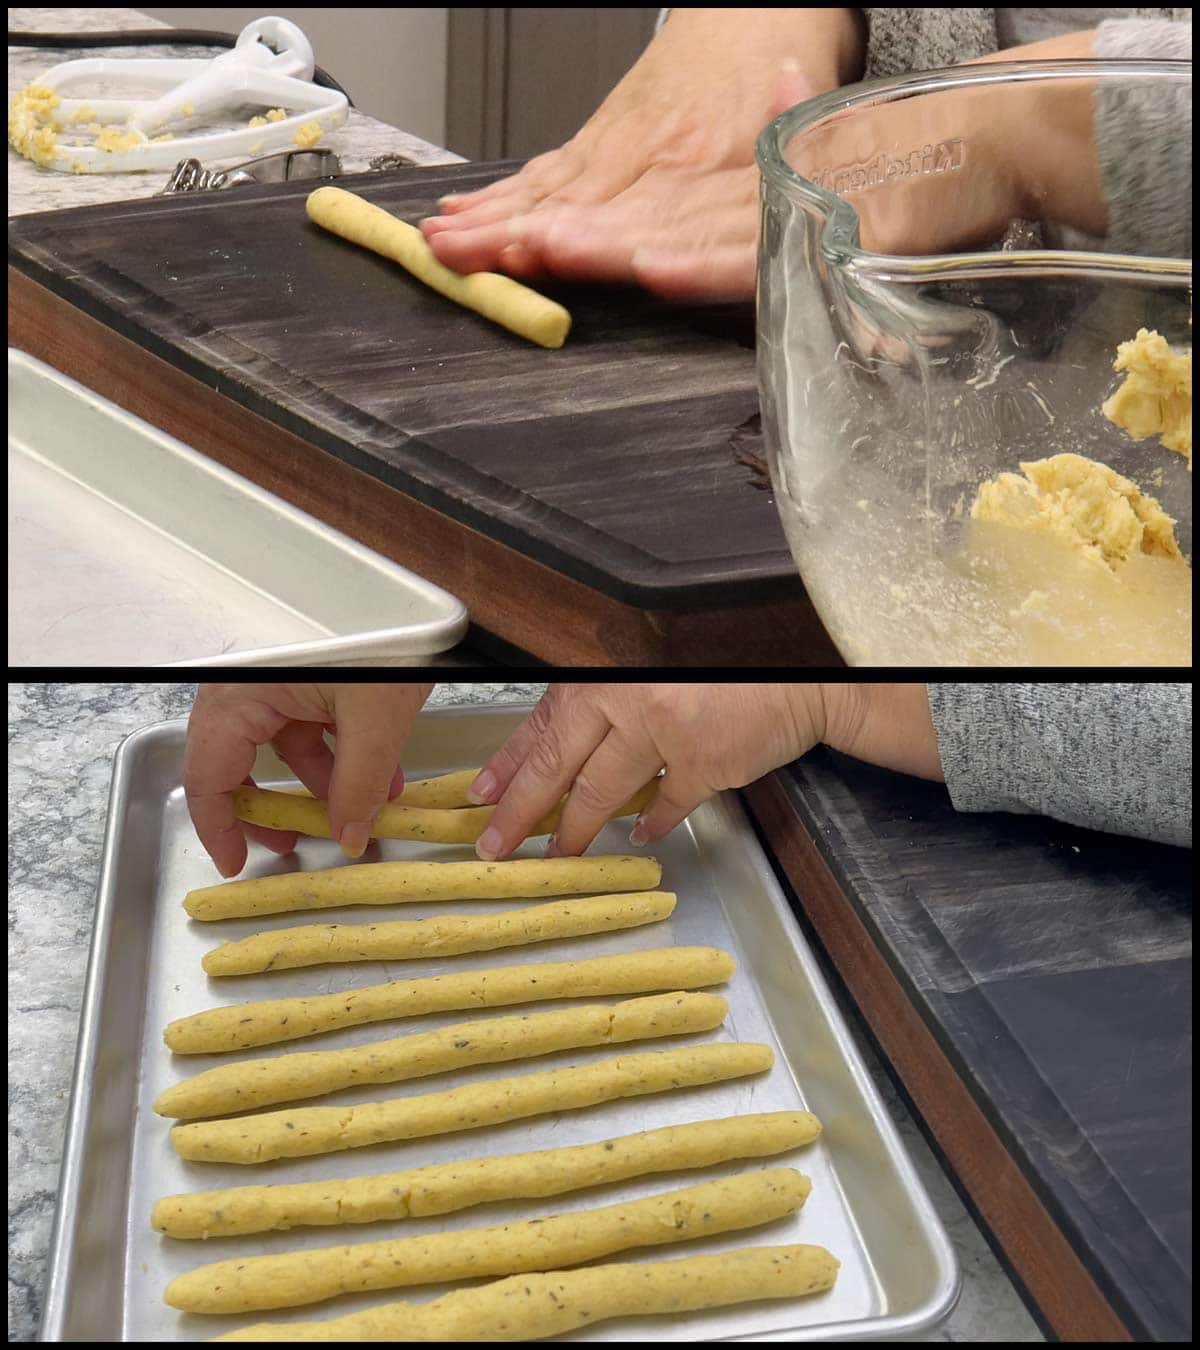 rolling the dough into breadsticks and putting them on a baking tray.